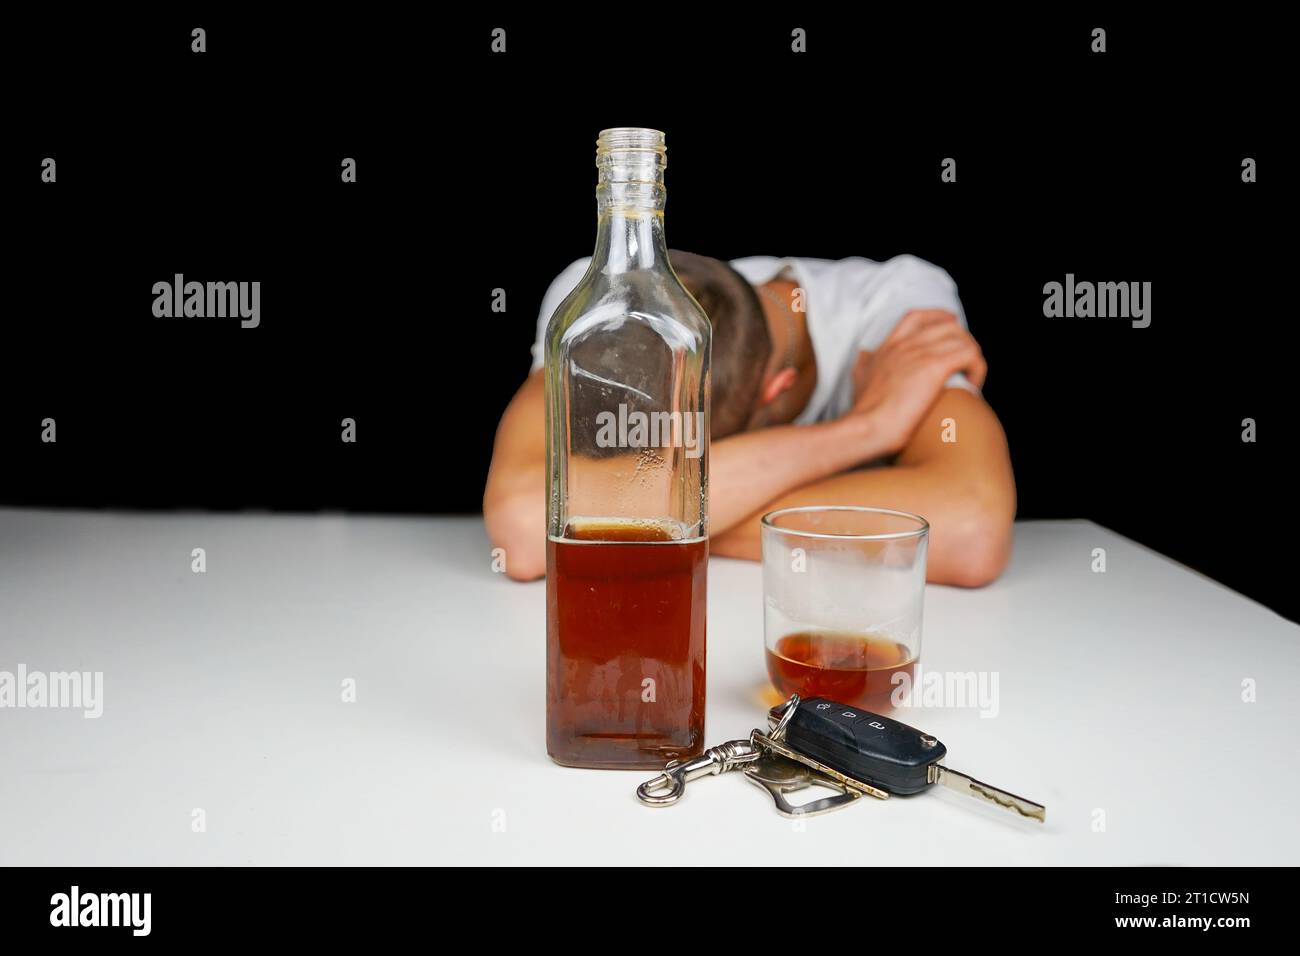 Car keys and alcohol on the table. Drunk man sleeping on the table with bottle of whiskey and drink. Alcoholism. Don't drive when you're drunk. Stock Photo